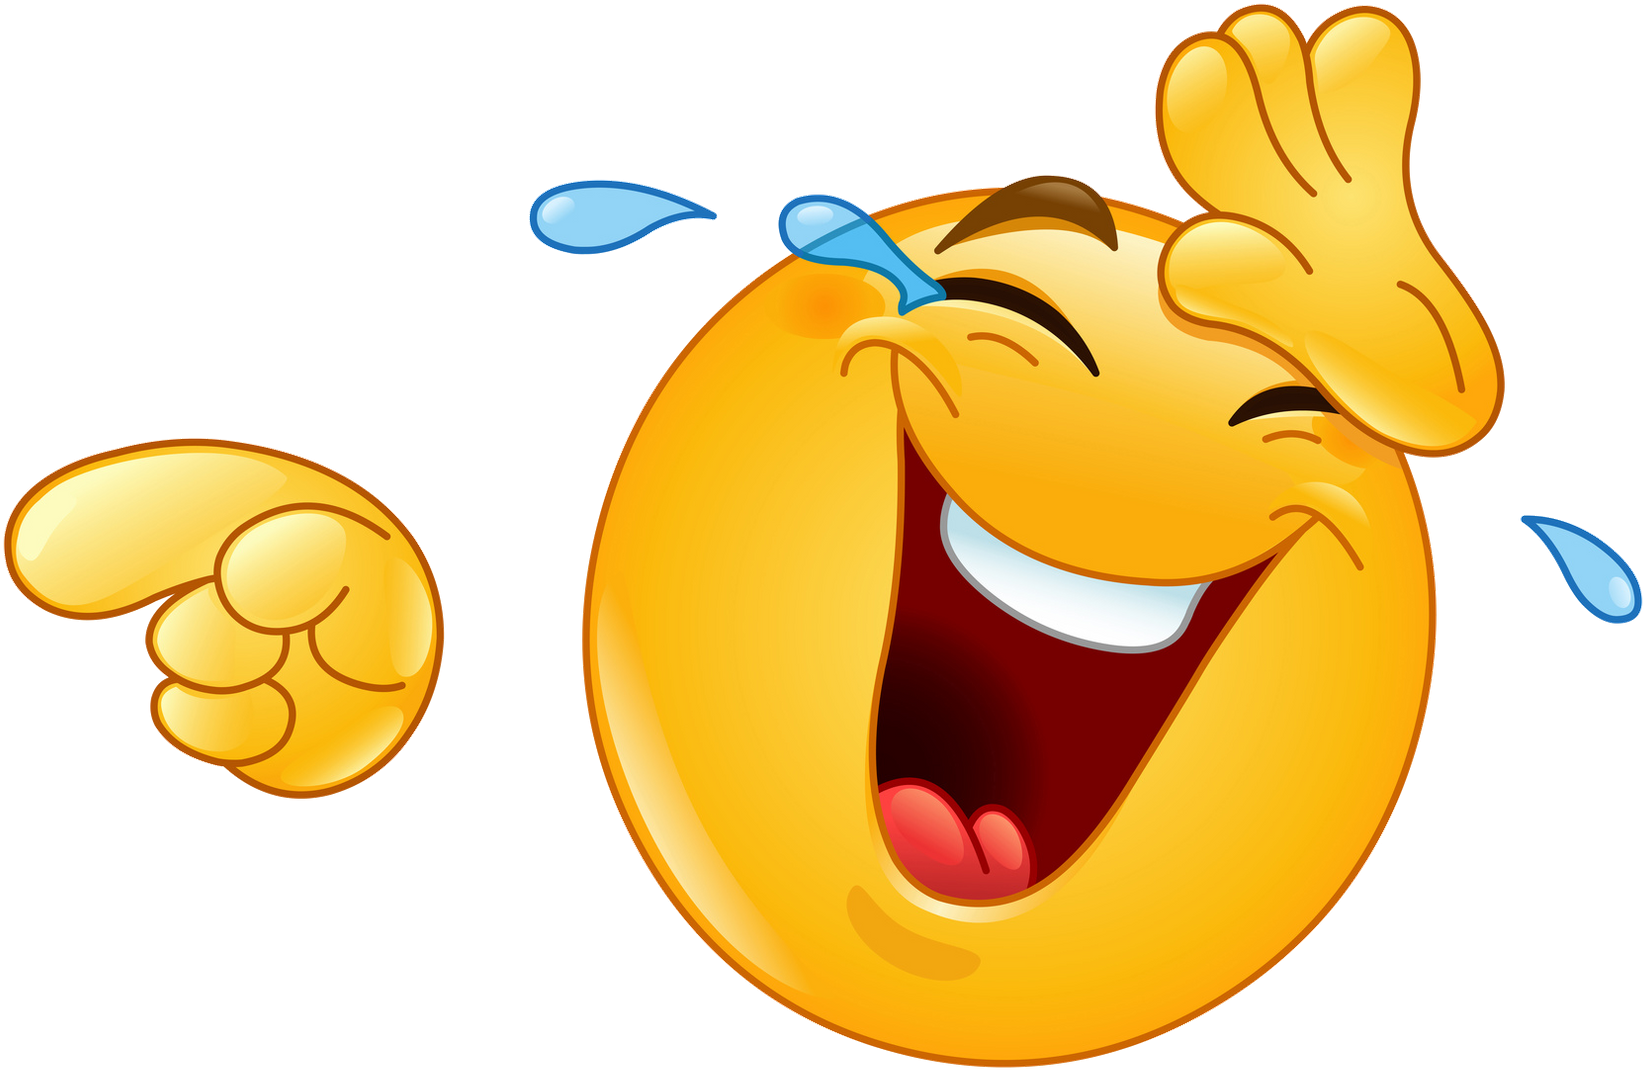 Download Smiley Lol Emoticon Laughter Clip Art - Laughing Pointing